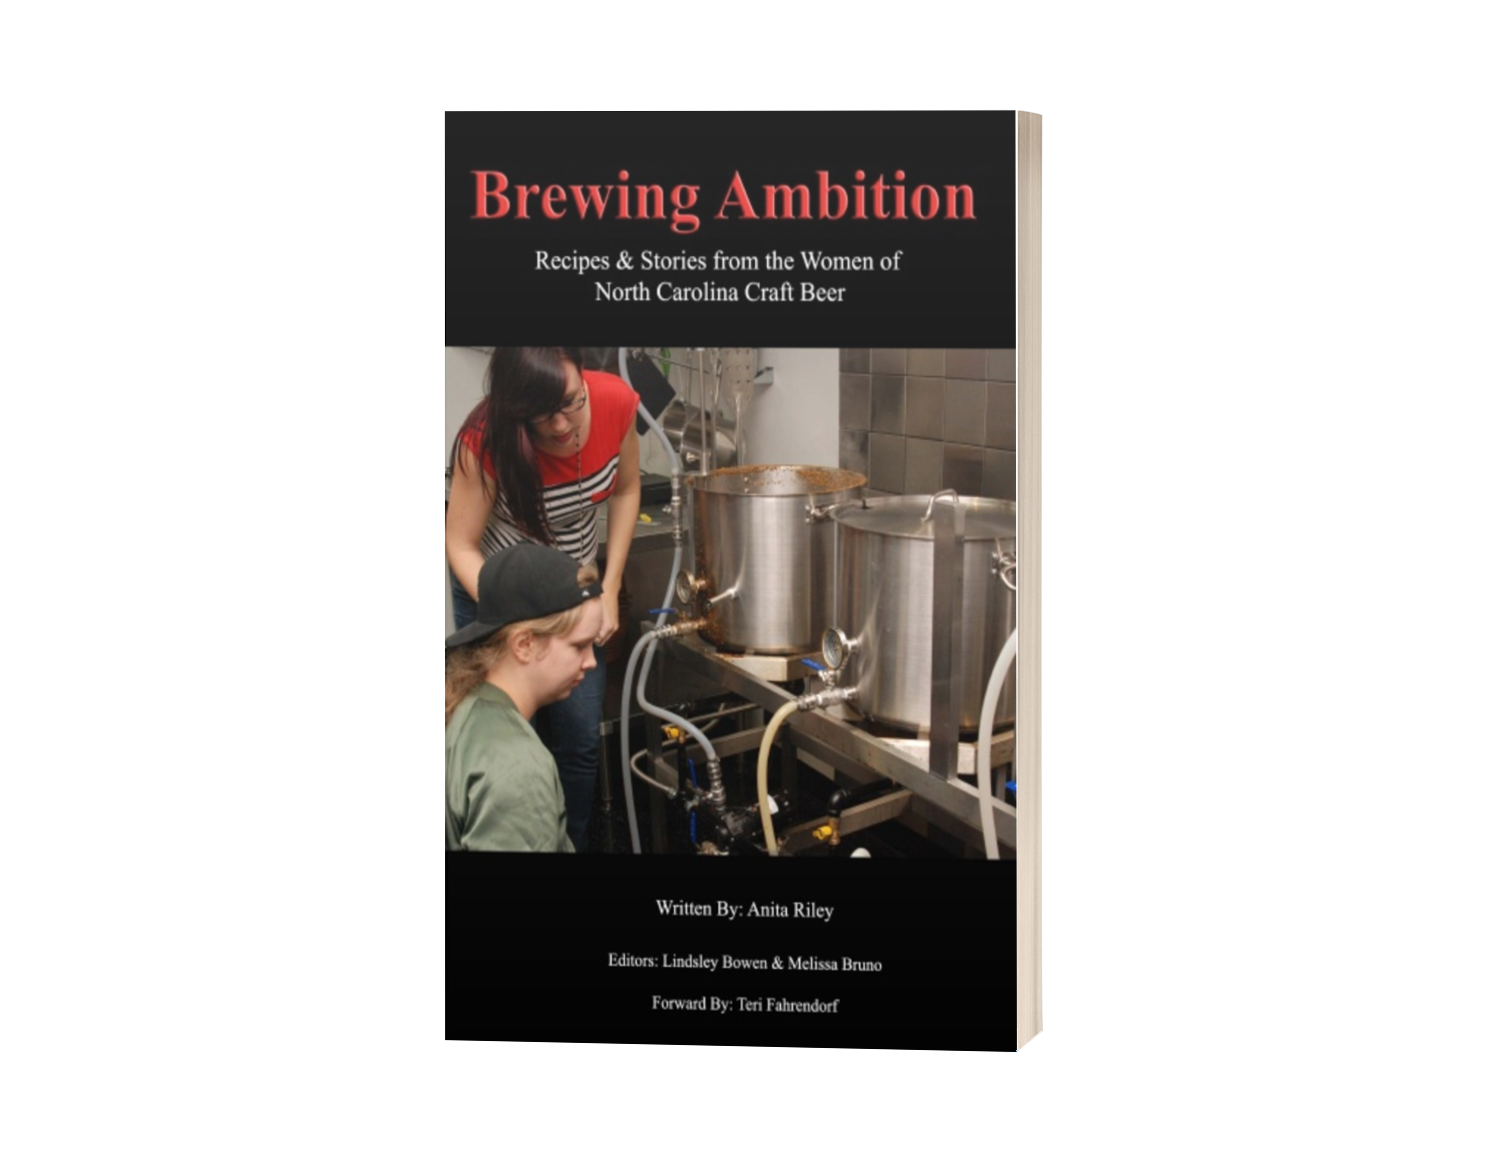 Brewing Ambition